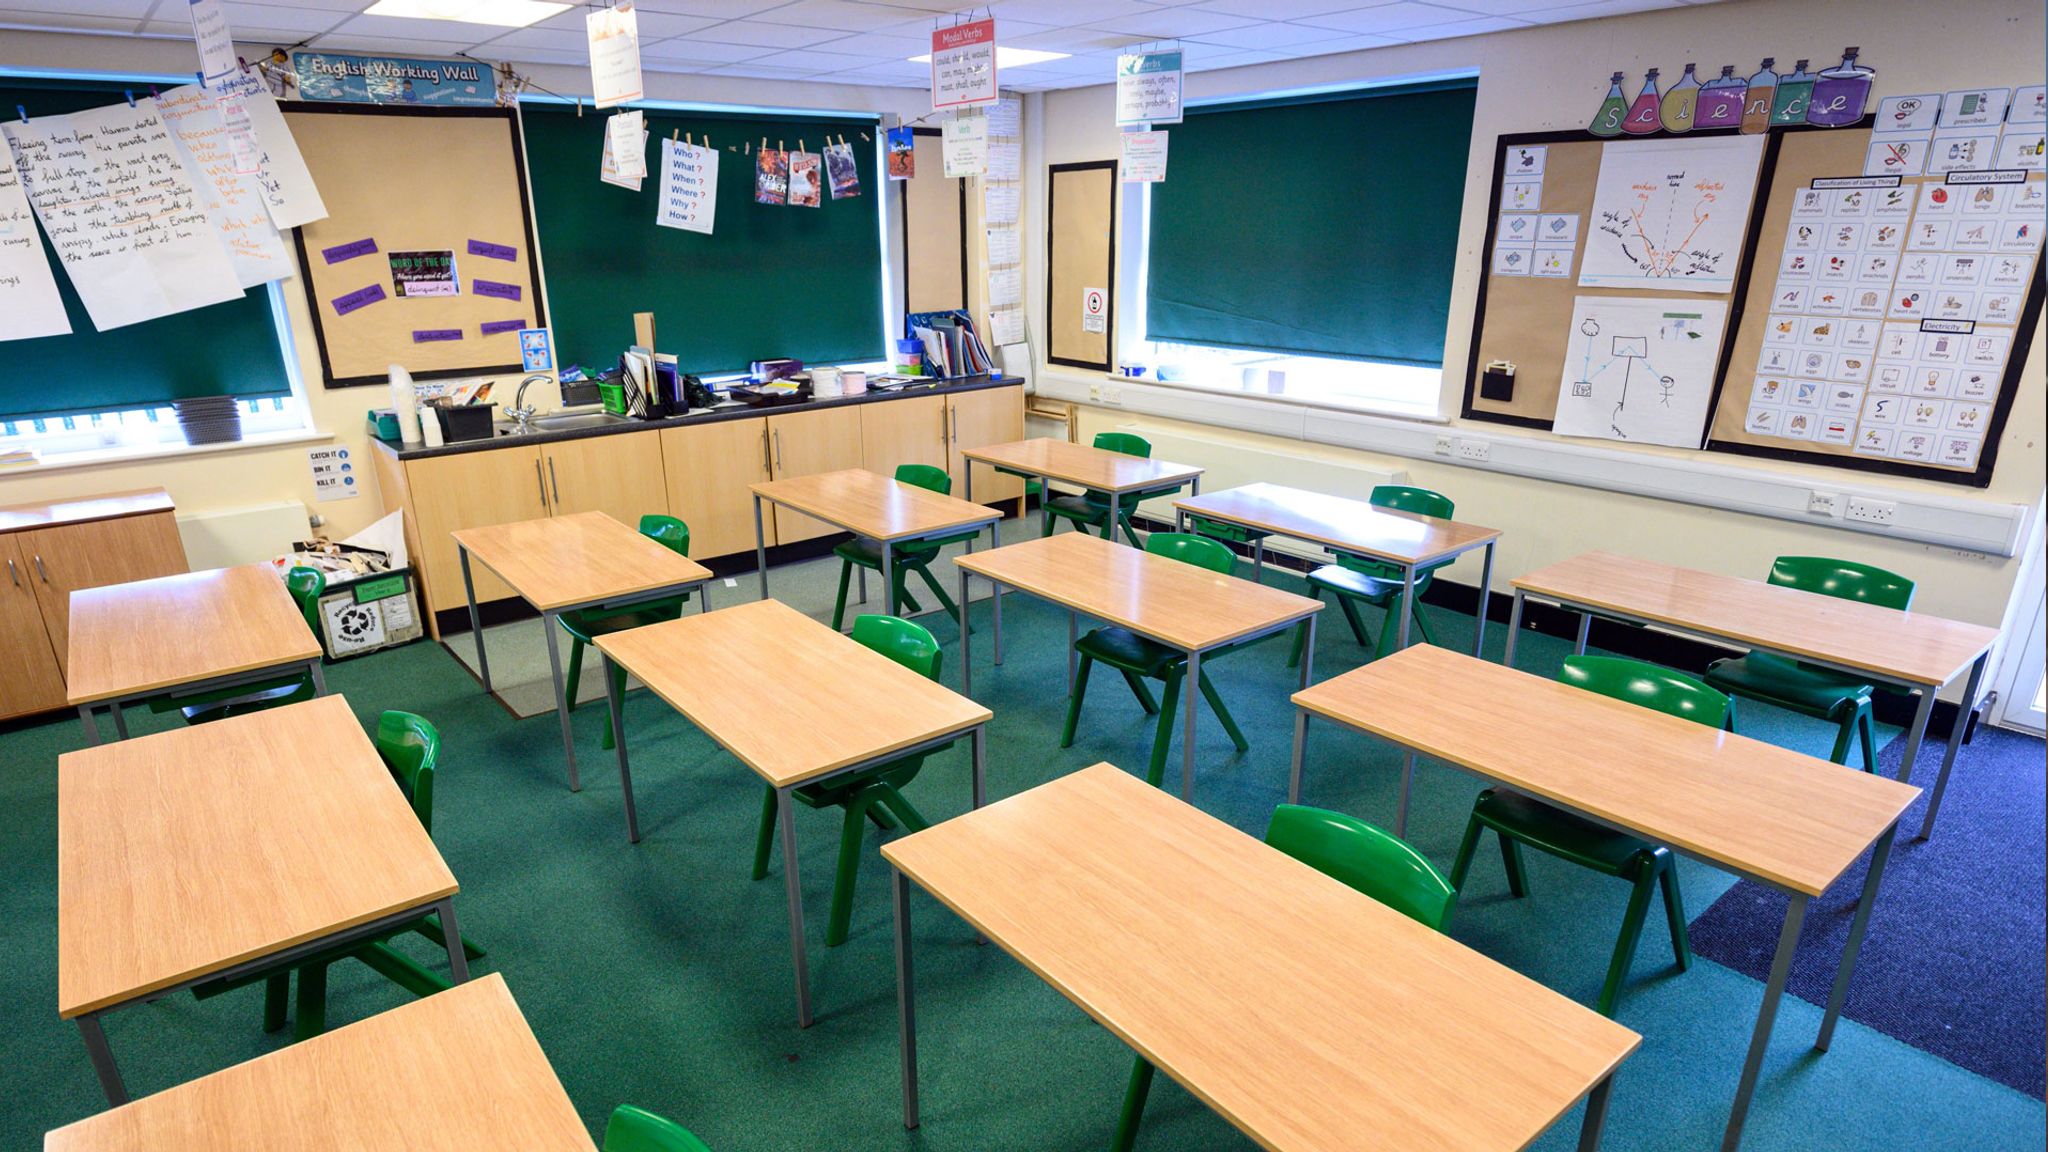 COVID-19: Secondary school students could have staggered return to classroom  in January | UK News | Sky News